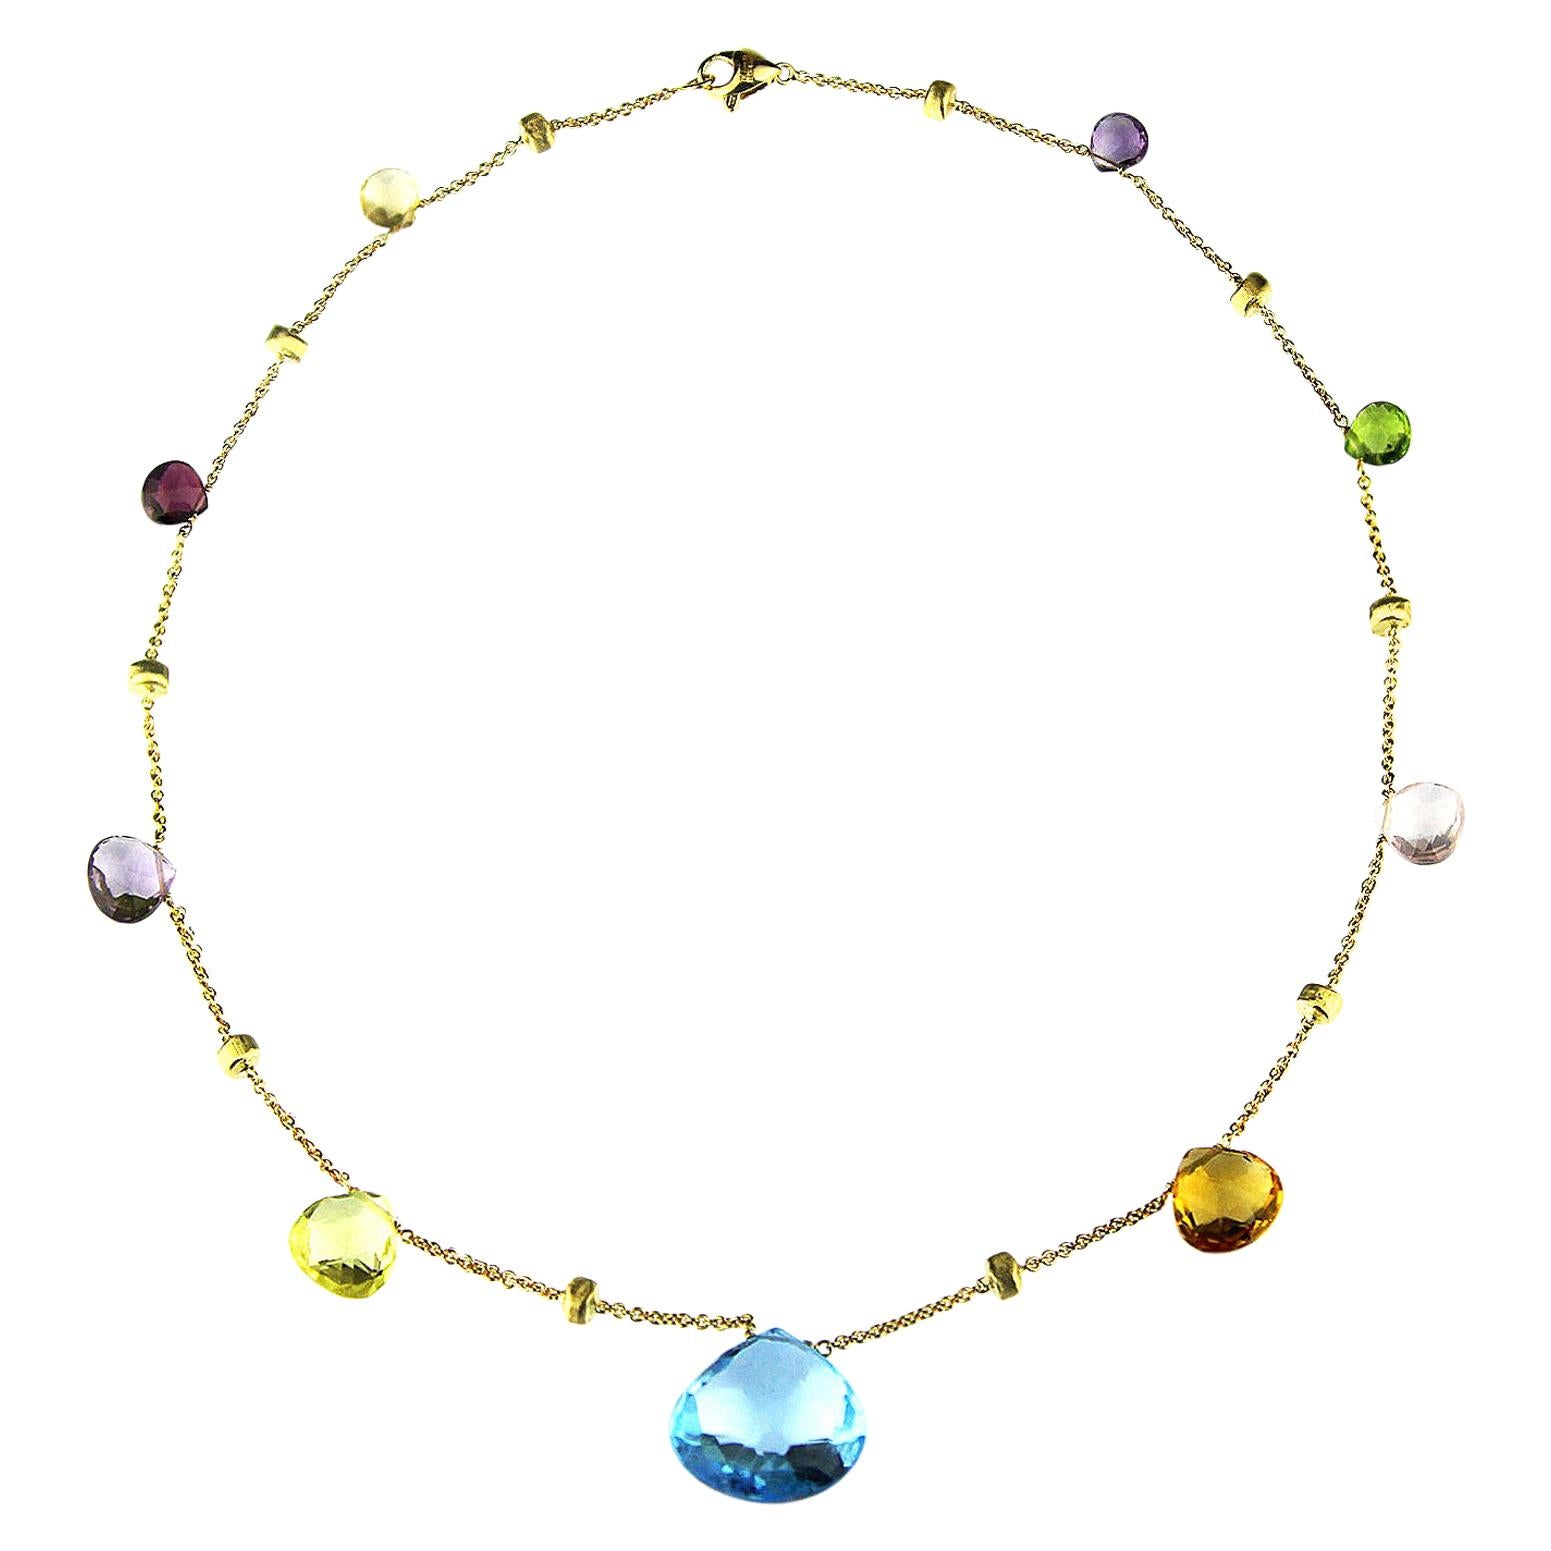 Marco Bicego Paradise Necklace in 18 Carat Yellow Gold, with Blue Topaz, Citrine